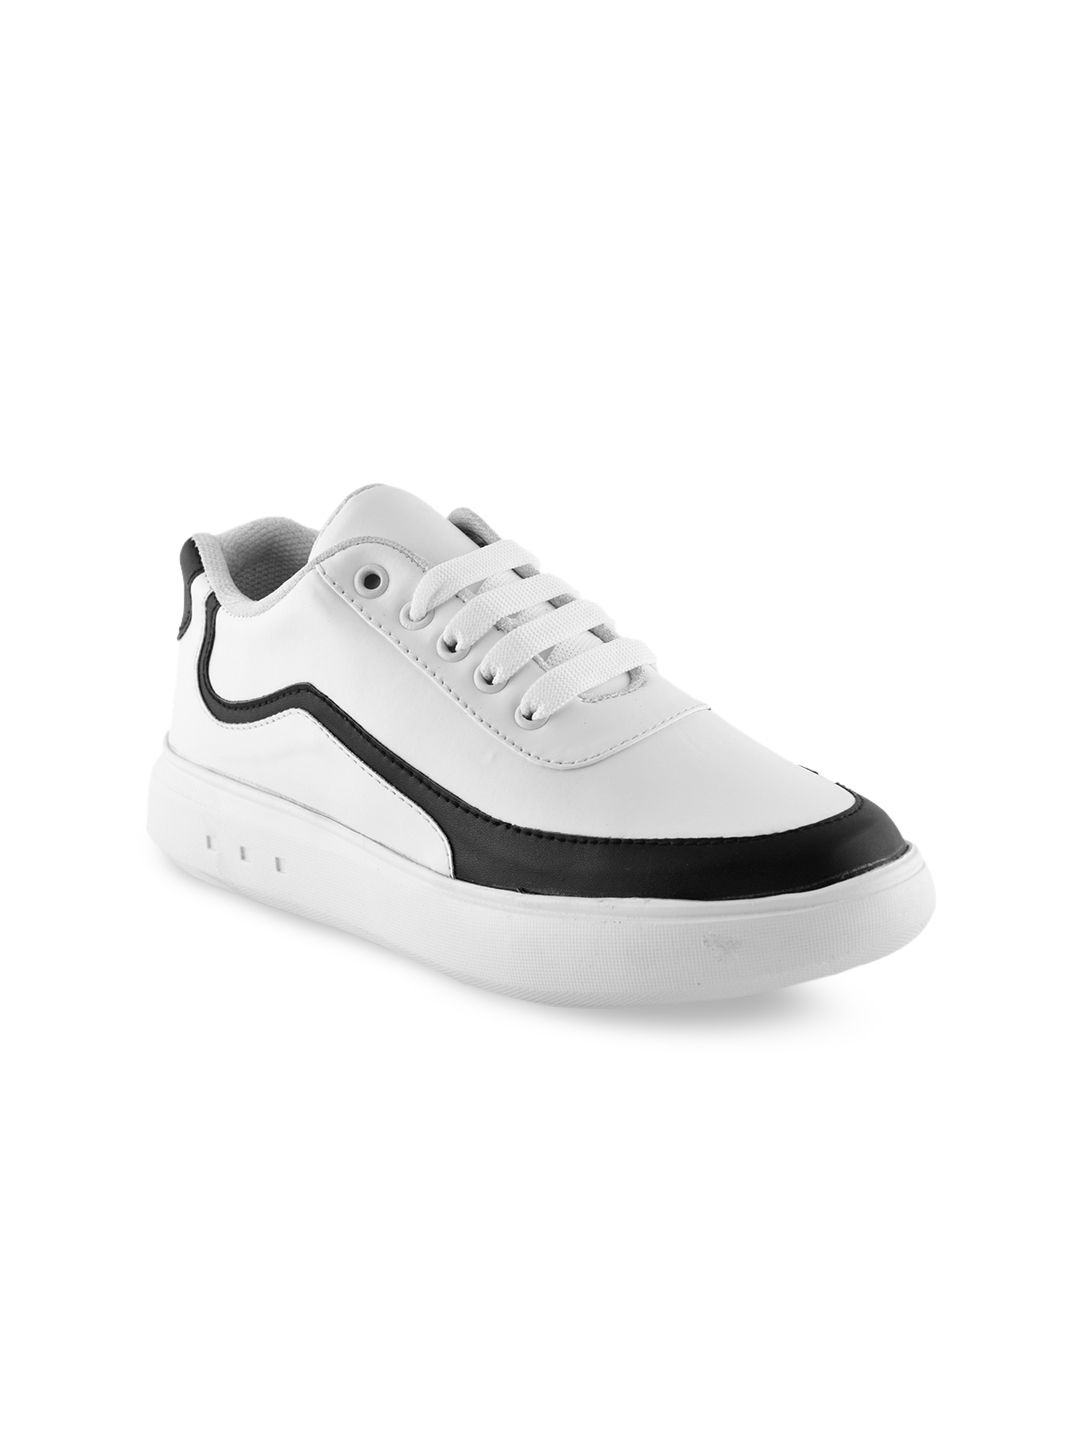 ZAPATOZ Women White & Black Colourblocked Lace-Up Lightweight Sneakers Price in India